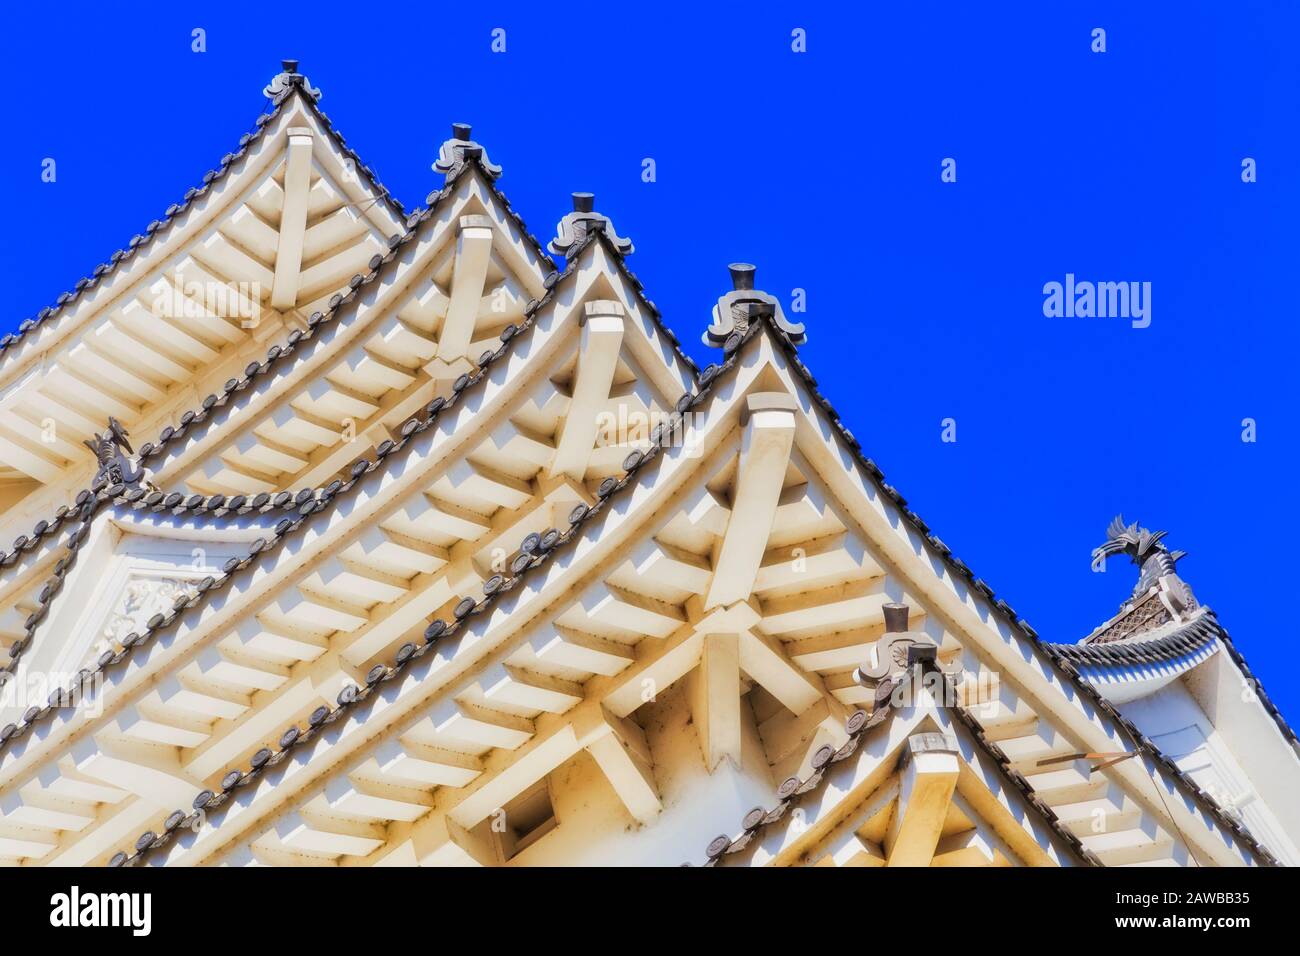 Traditional japanese architecture - corners of layered roof with beams and inner structure against blue sky in one of historic castles. Stock Photo